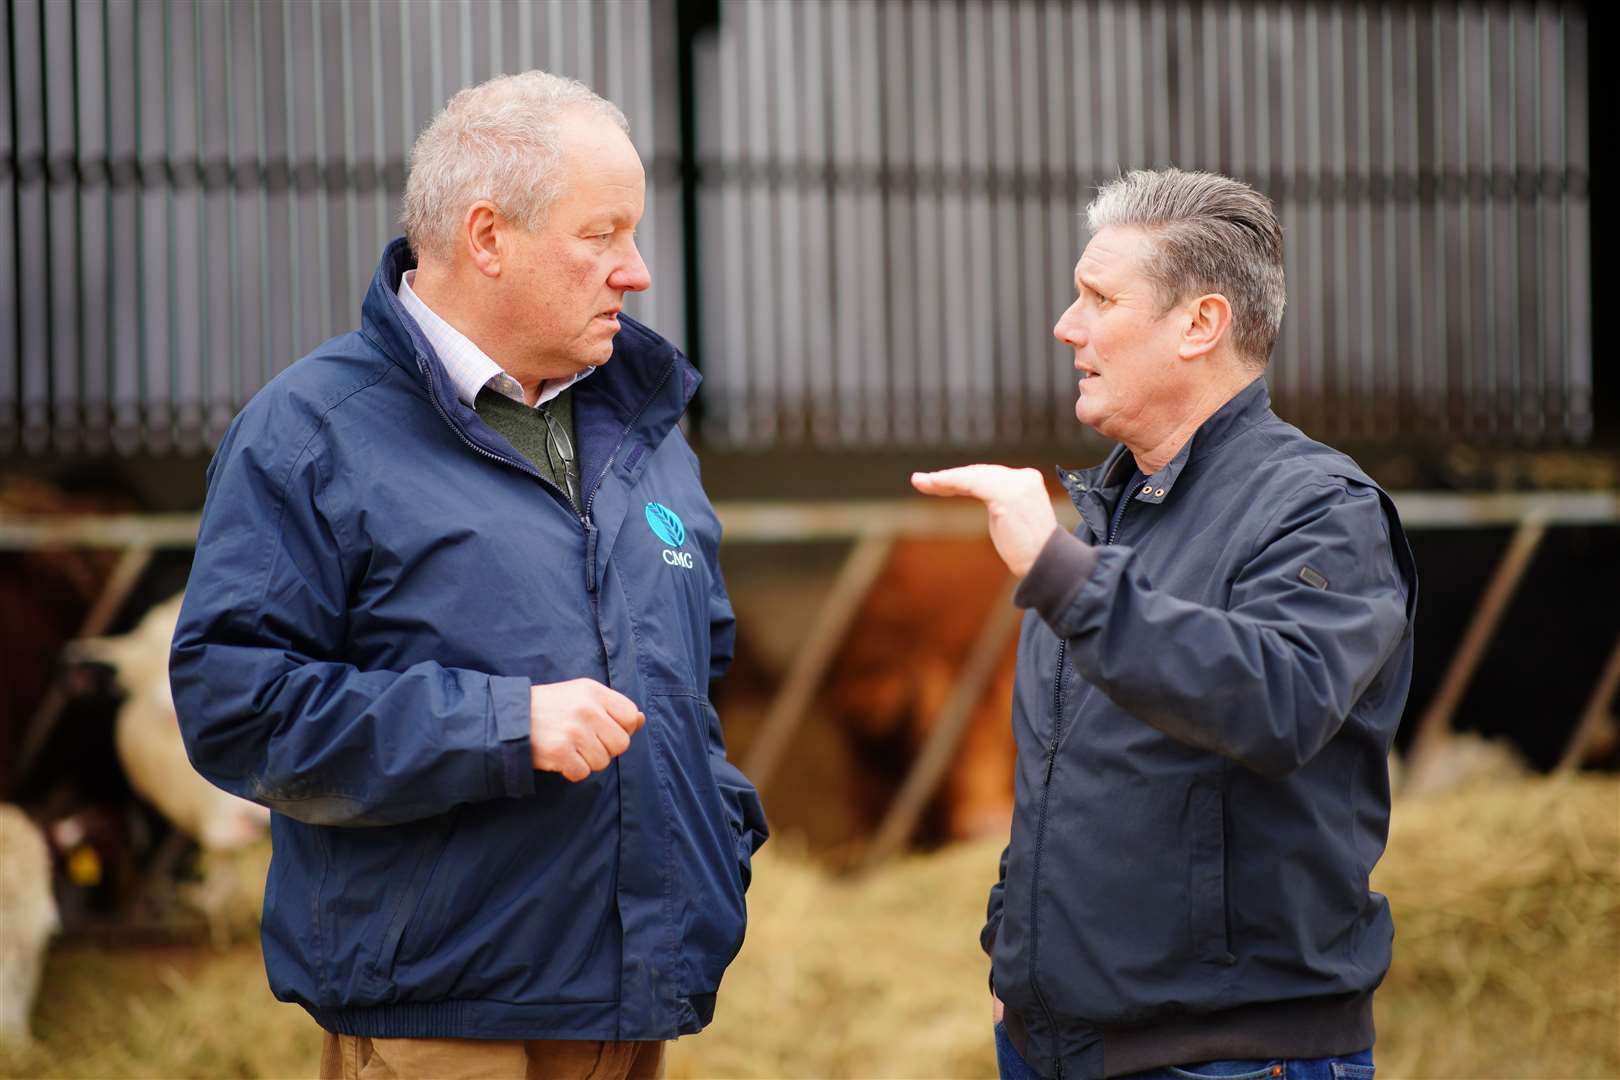 Sir Keir Starmer (right) speaks to Rupert Inkpen, the owner of Home Farm, Solihull, West Midlands (Ben Birchall/PA)